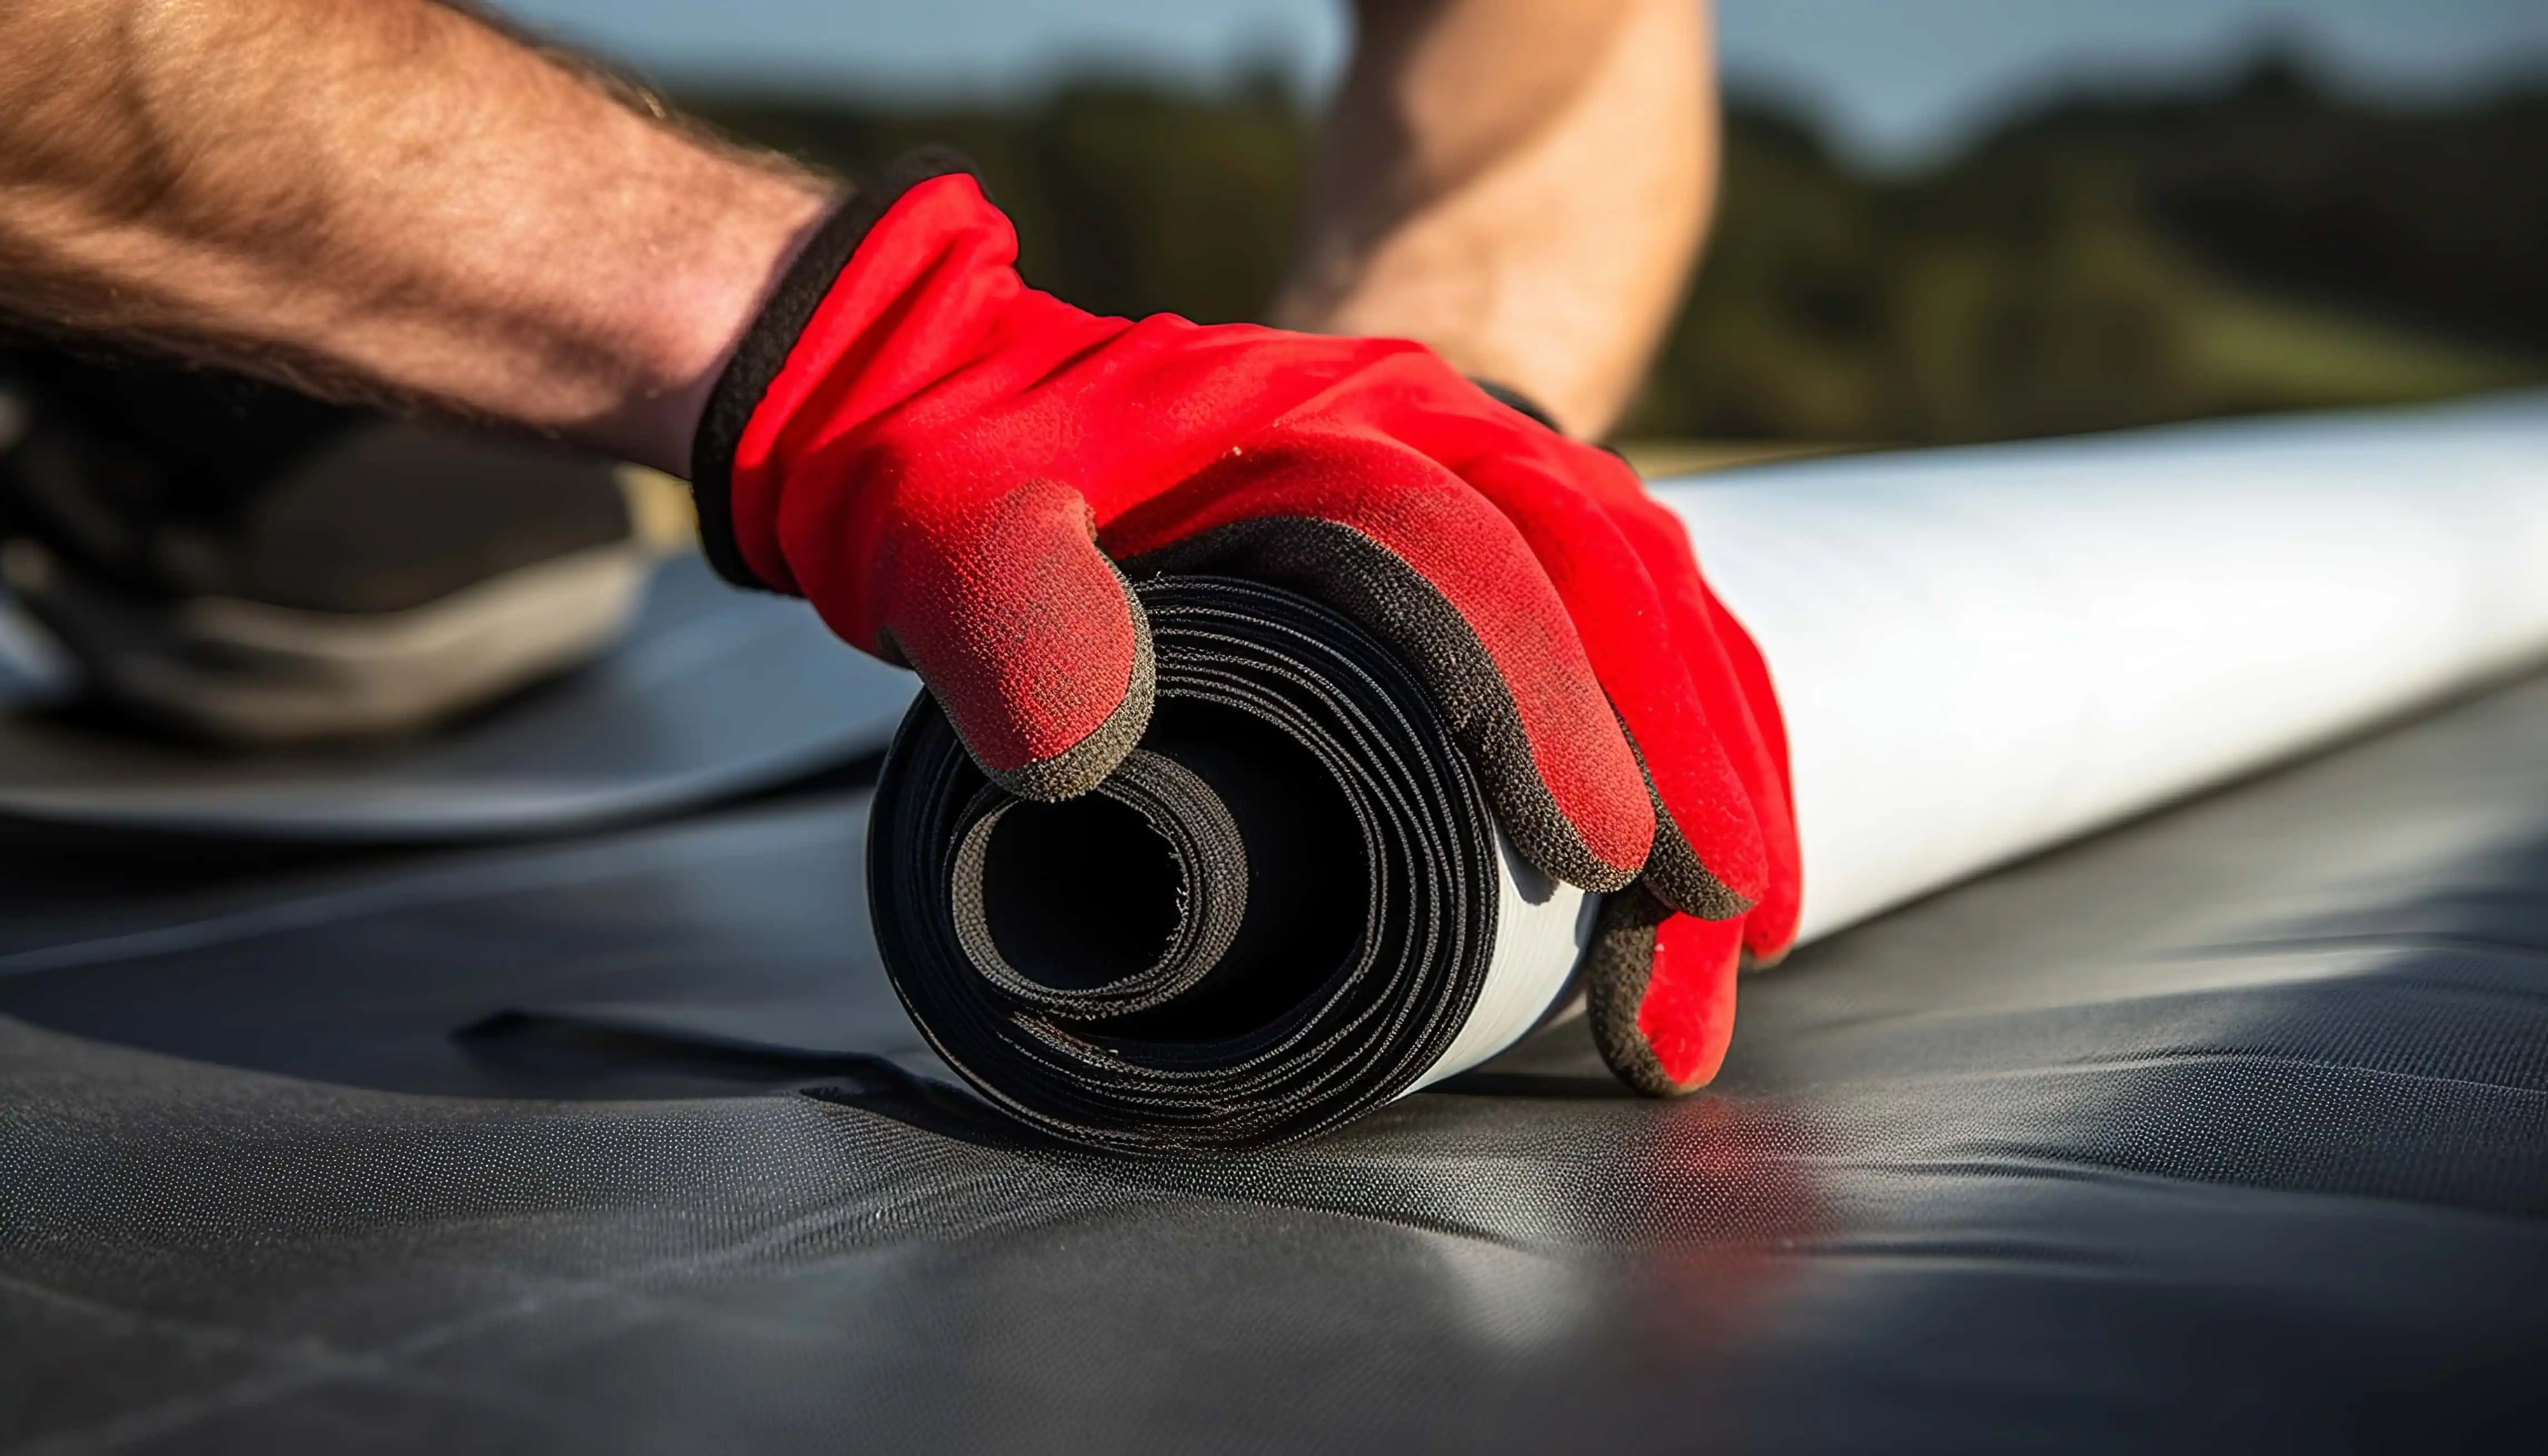 Roofing Worker Preparing a Roll of EPDM Roof Membrane Material, forces on hand closeup